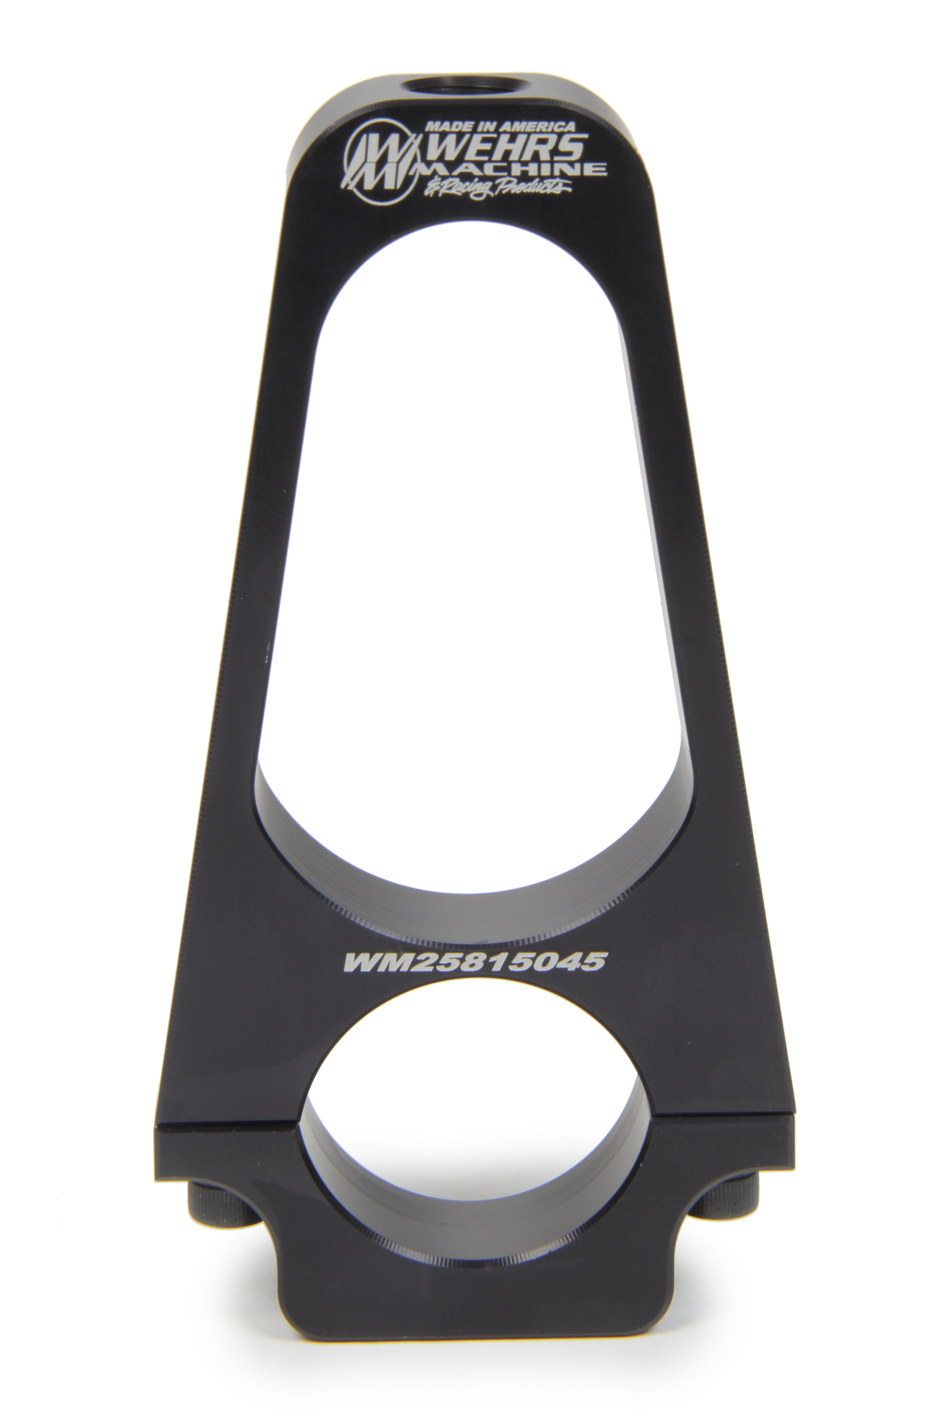 Wehrs Machine WM25815045 Hood Pin Bracket, Clamp-On, 1-1/2 in Tube, 1/2 in OD, 4-1/2 in Tall, Aluminum, Black Anodized, Each